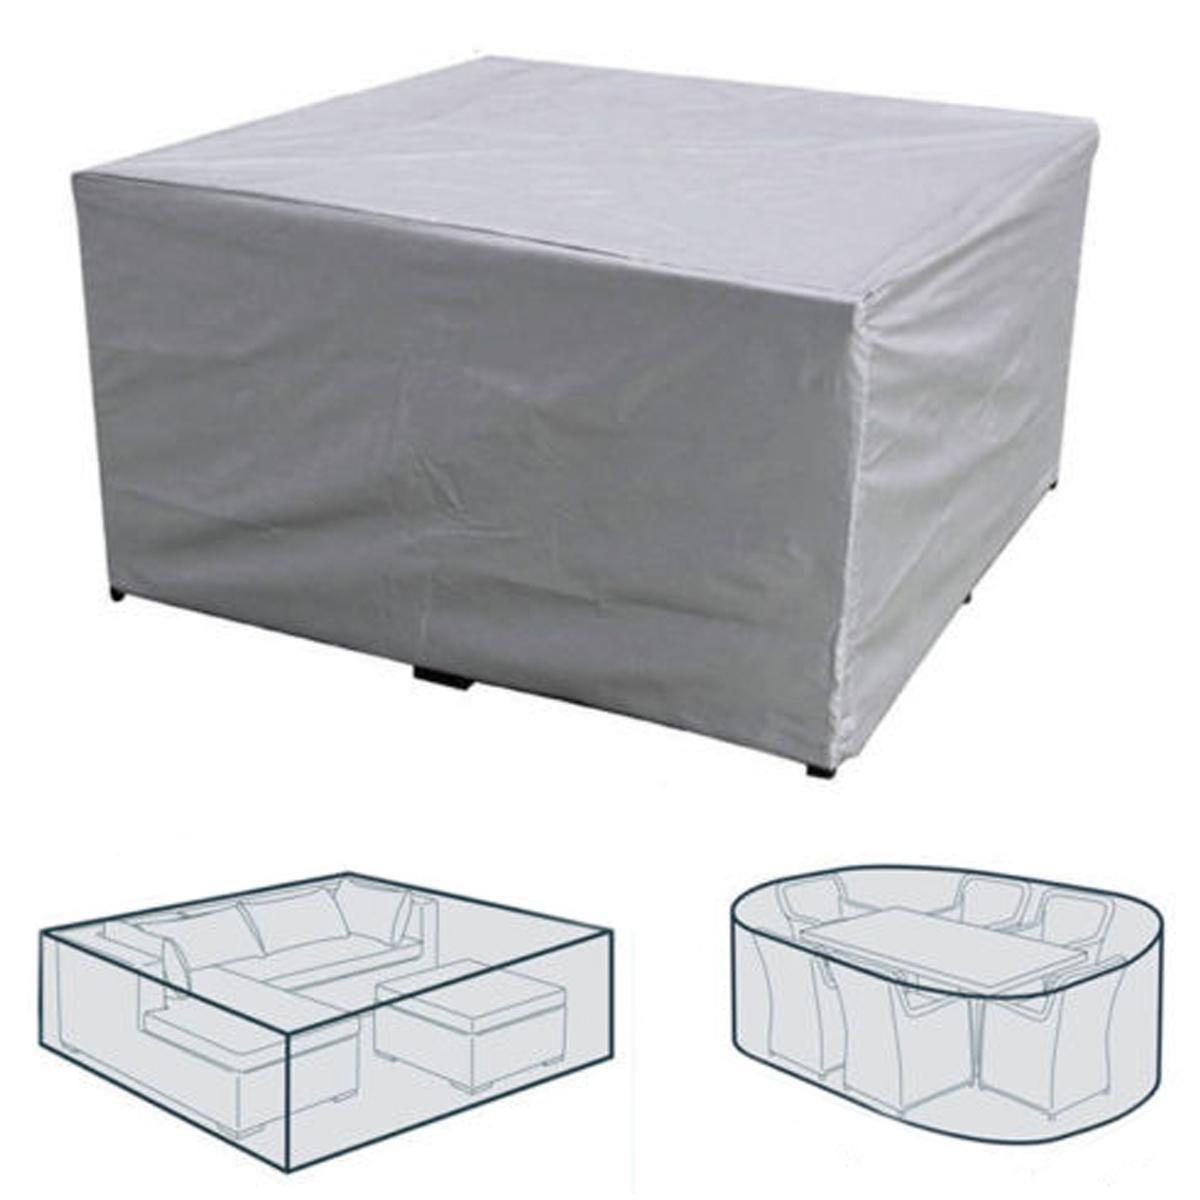 2019 Big Sizes Summer Bbq Waterproof Outdoor Patio Garden Furniture Covers Rain Snow Chair Covers For Sofa Table Chair Dust Proof Cover From pertaining to measurements 1200 X 1200